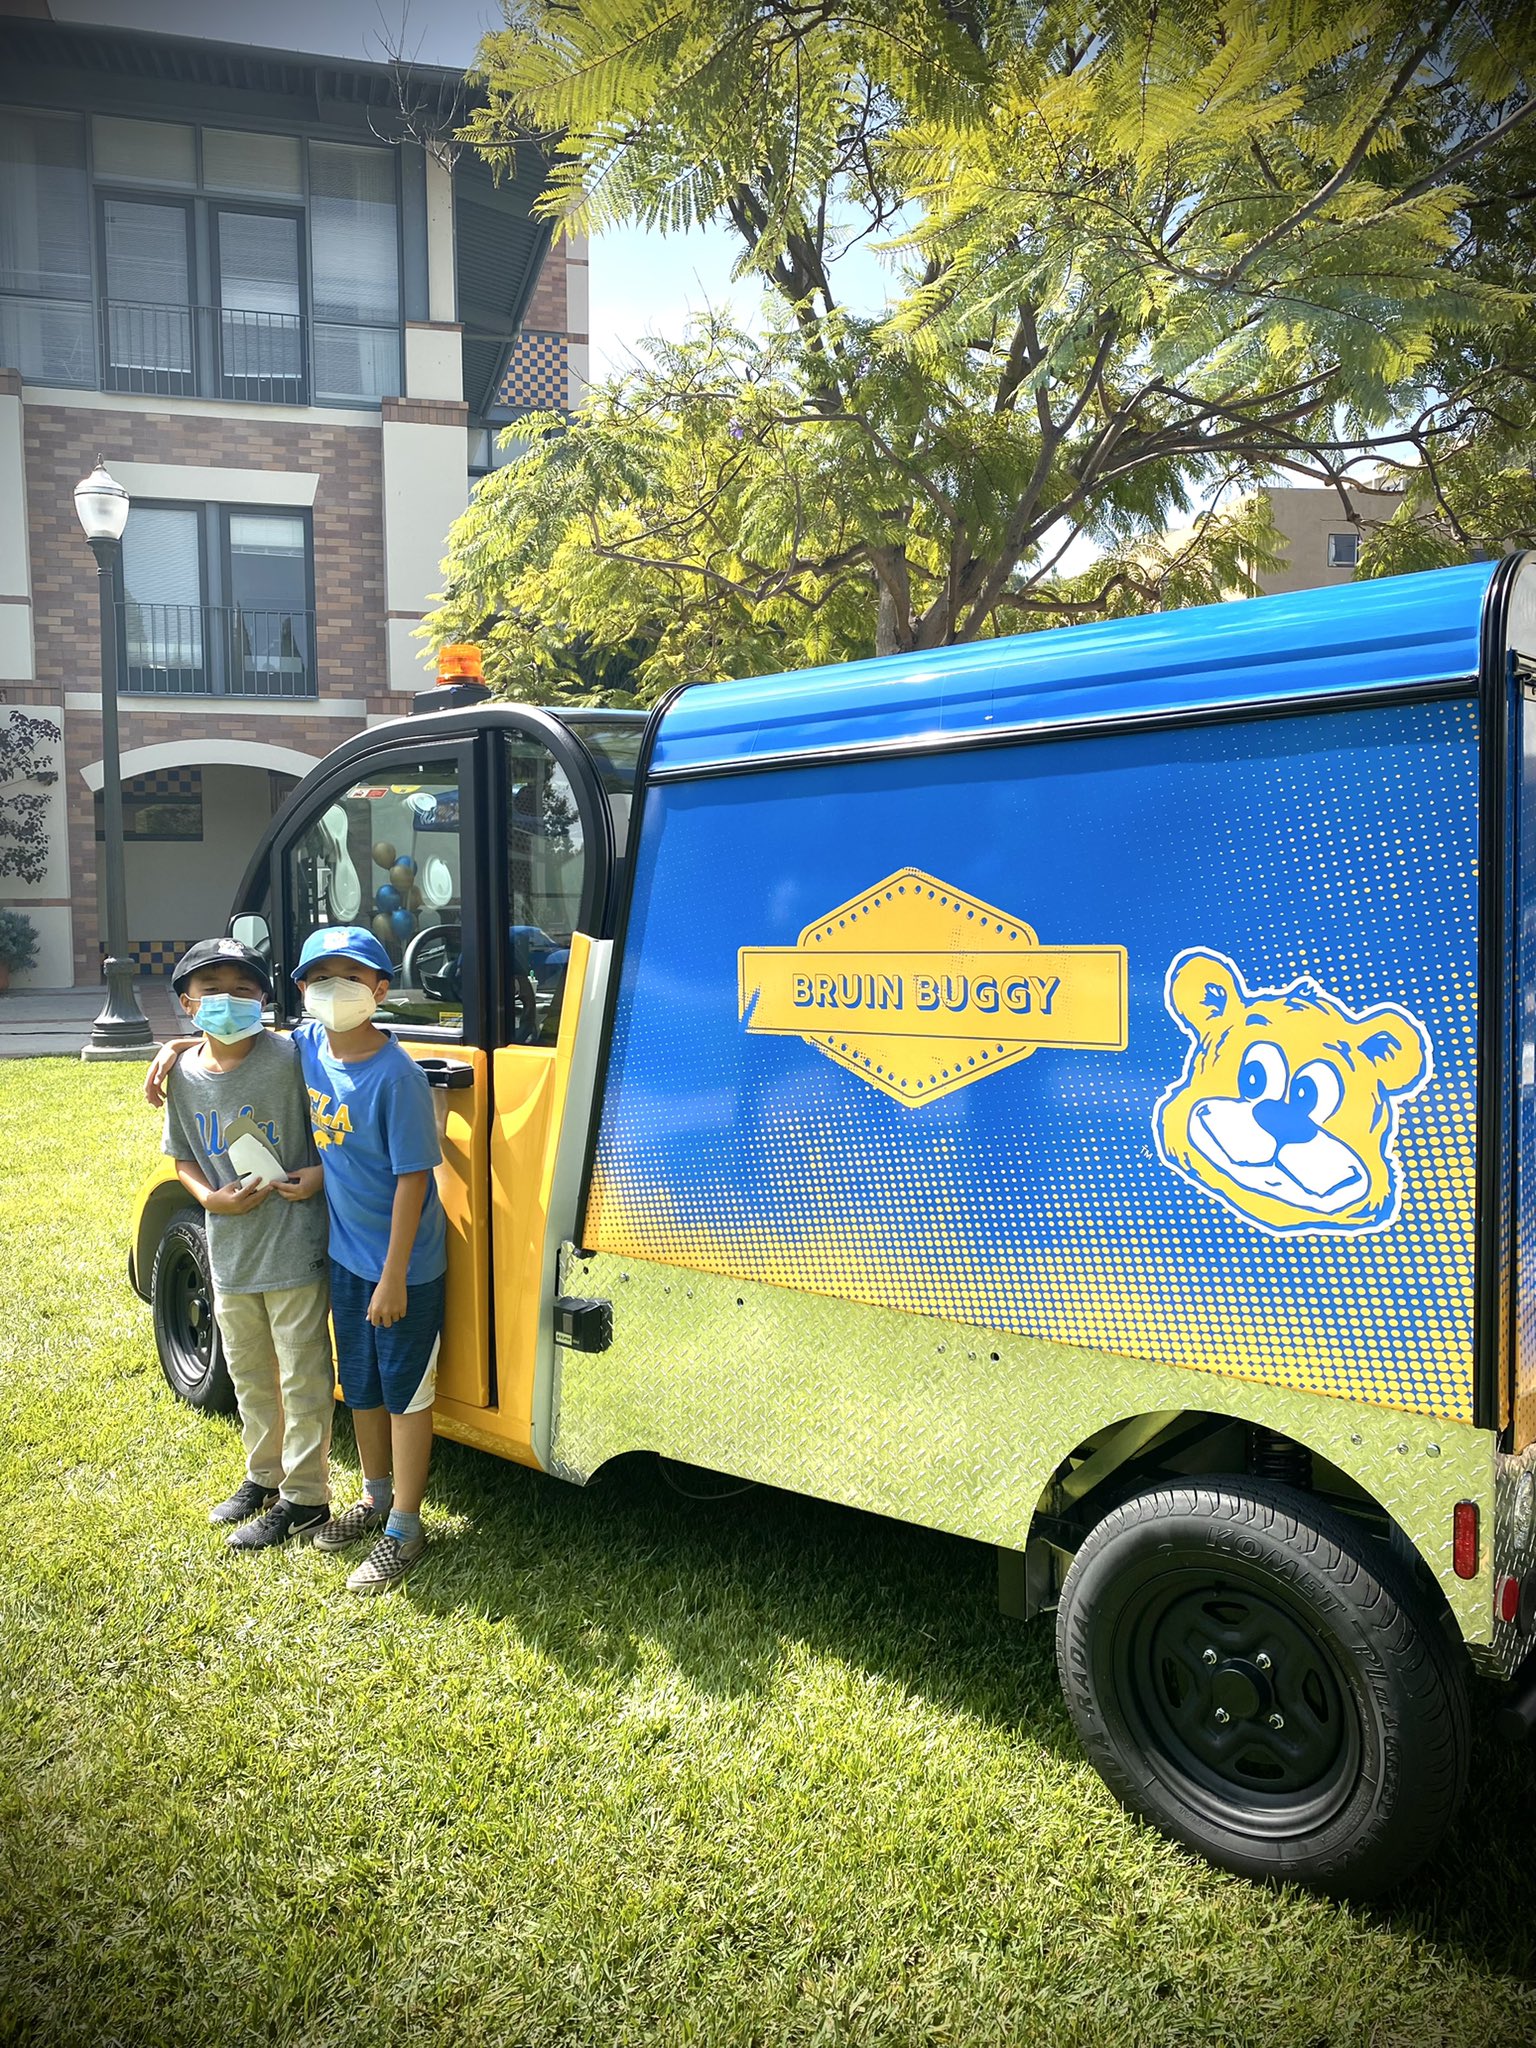 Maladroit bijeenkomst Feat UCLA on Twitter: "Welcome Bruins! During move-in from 10am-4pm find the Bruin  Buggy on the Hill to get your own @ASUCLAStudentU campus coupon book! 💙💛  https://t.co/4olV0y2KbZ" / Twitter